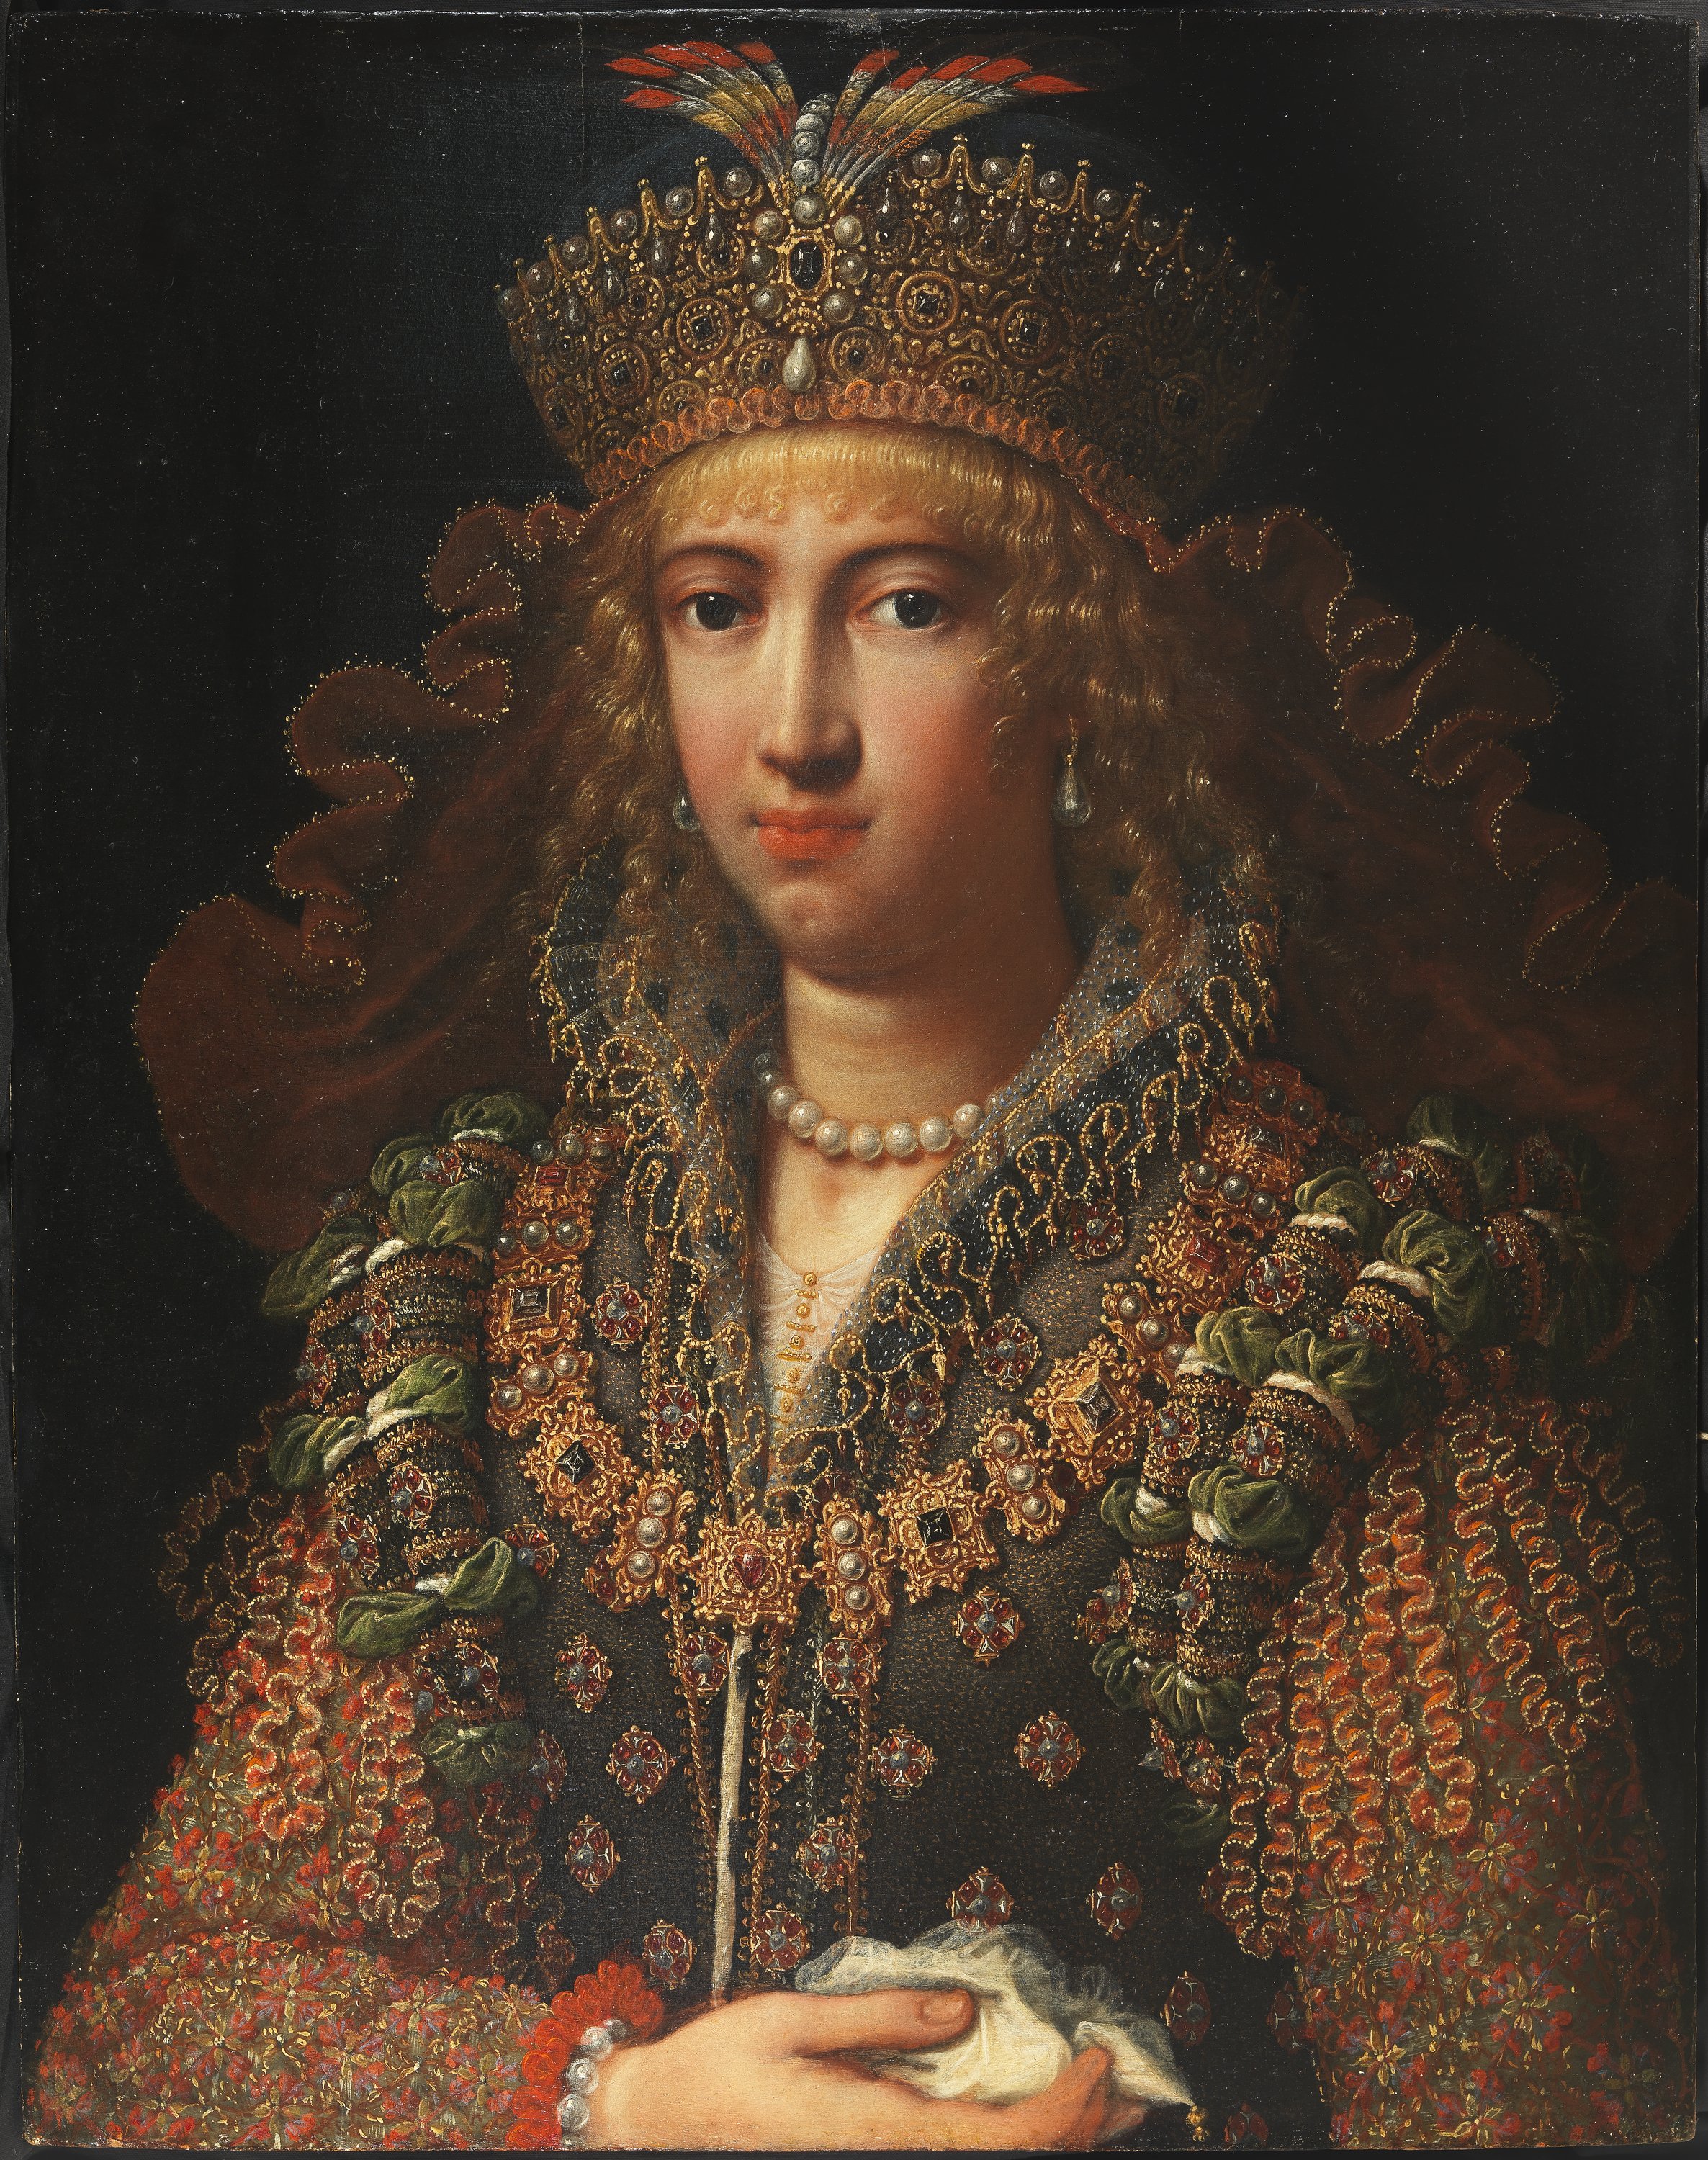 News about a Painting at the Uffizi: the Queen of Armenia by Mario Balassi